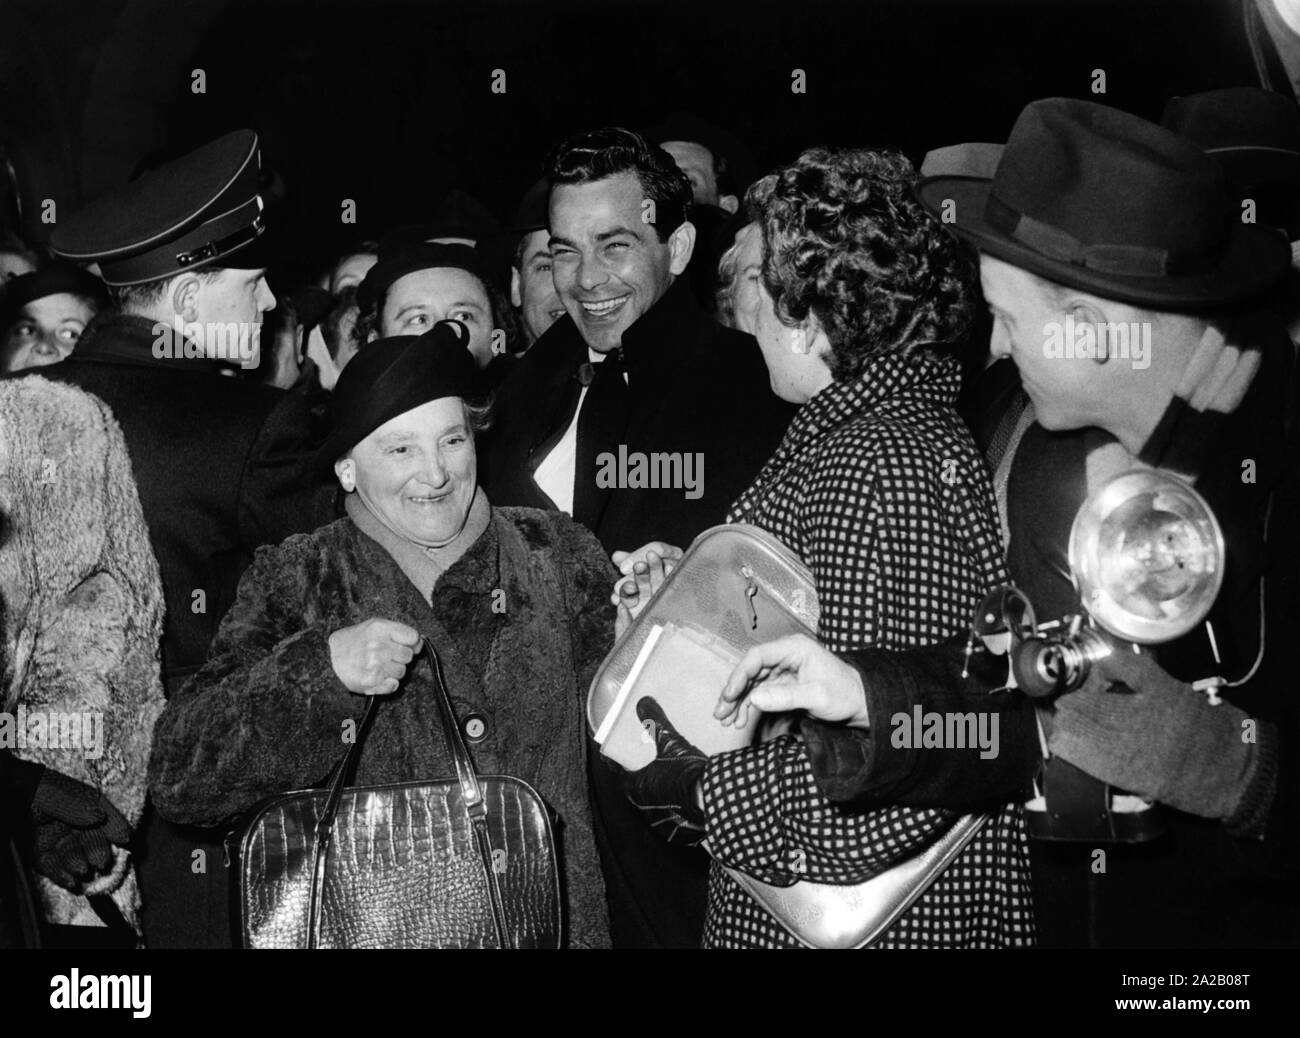 The Austrian actor Adrian Hoven amidst fans. Undated photo, presumably from around the year 1960. Stock Photo